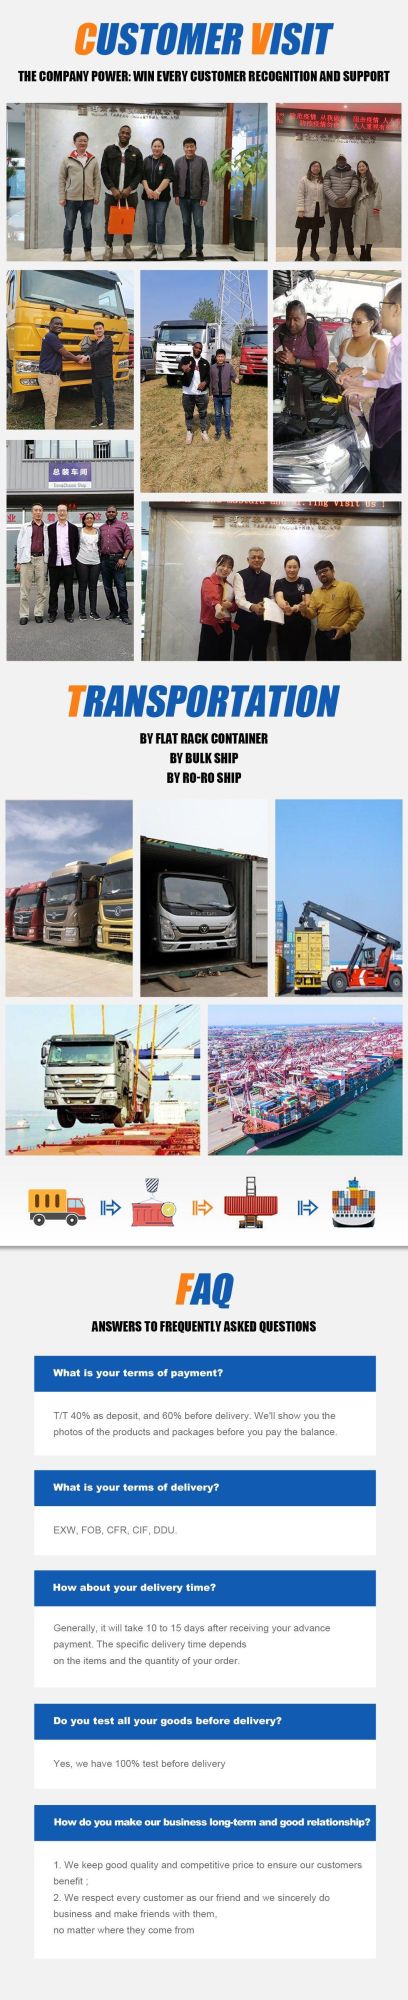 Truck Crane 25tons, 30 Tons, 35tons, 50tons Mobile Crane Machine for Construction at Good Price